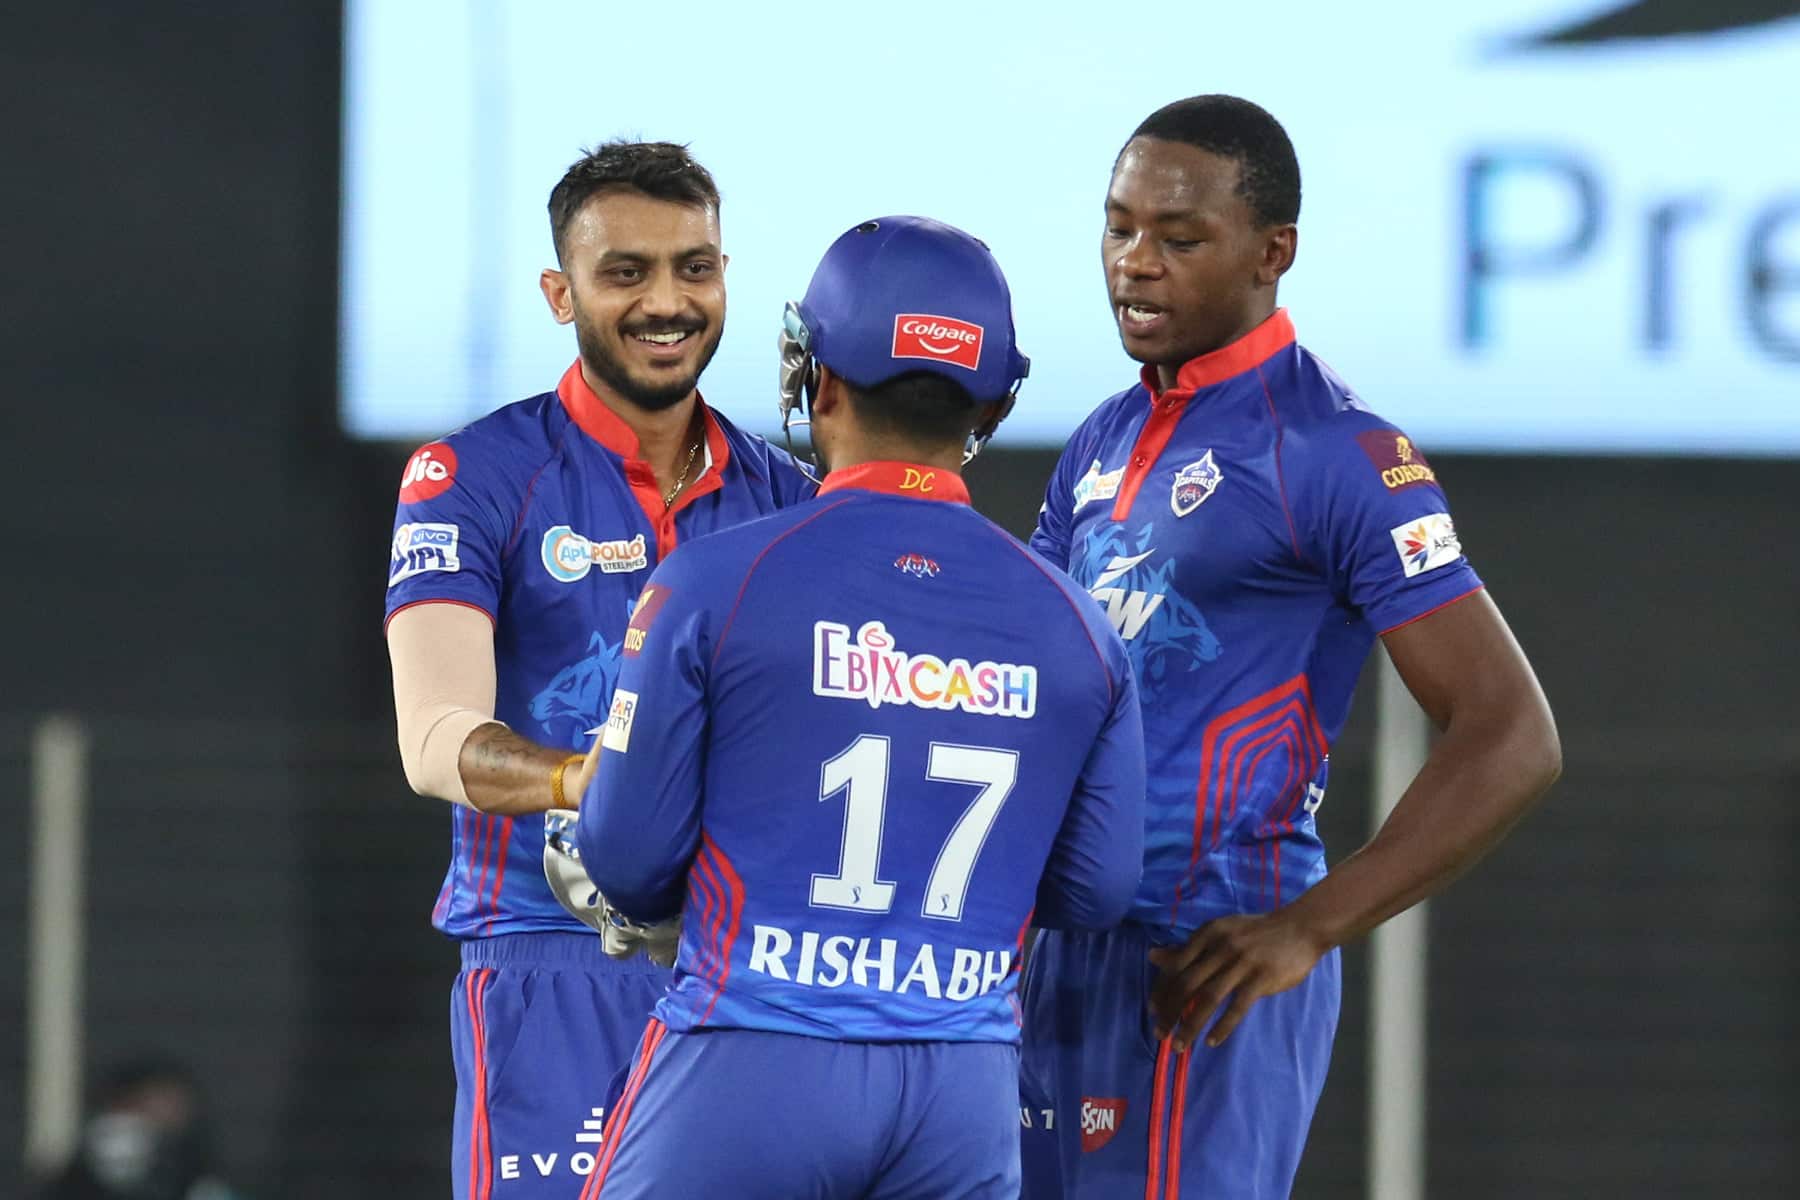 Delhi Capitals all-rounder Axar Patel (left) celebrates after taking a wicket against Kolkata Knight Riders in their IPL 2021 match in Ahmedabad. (Photo: IPL)